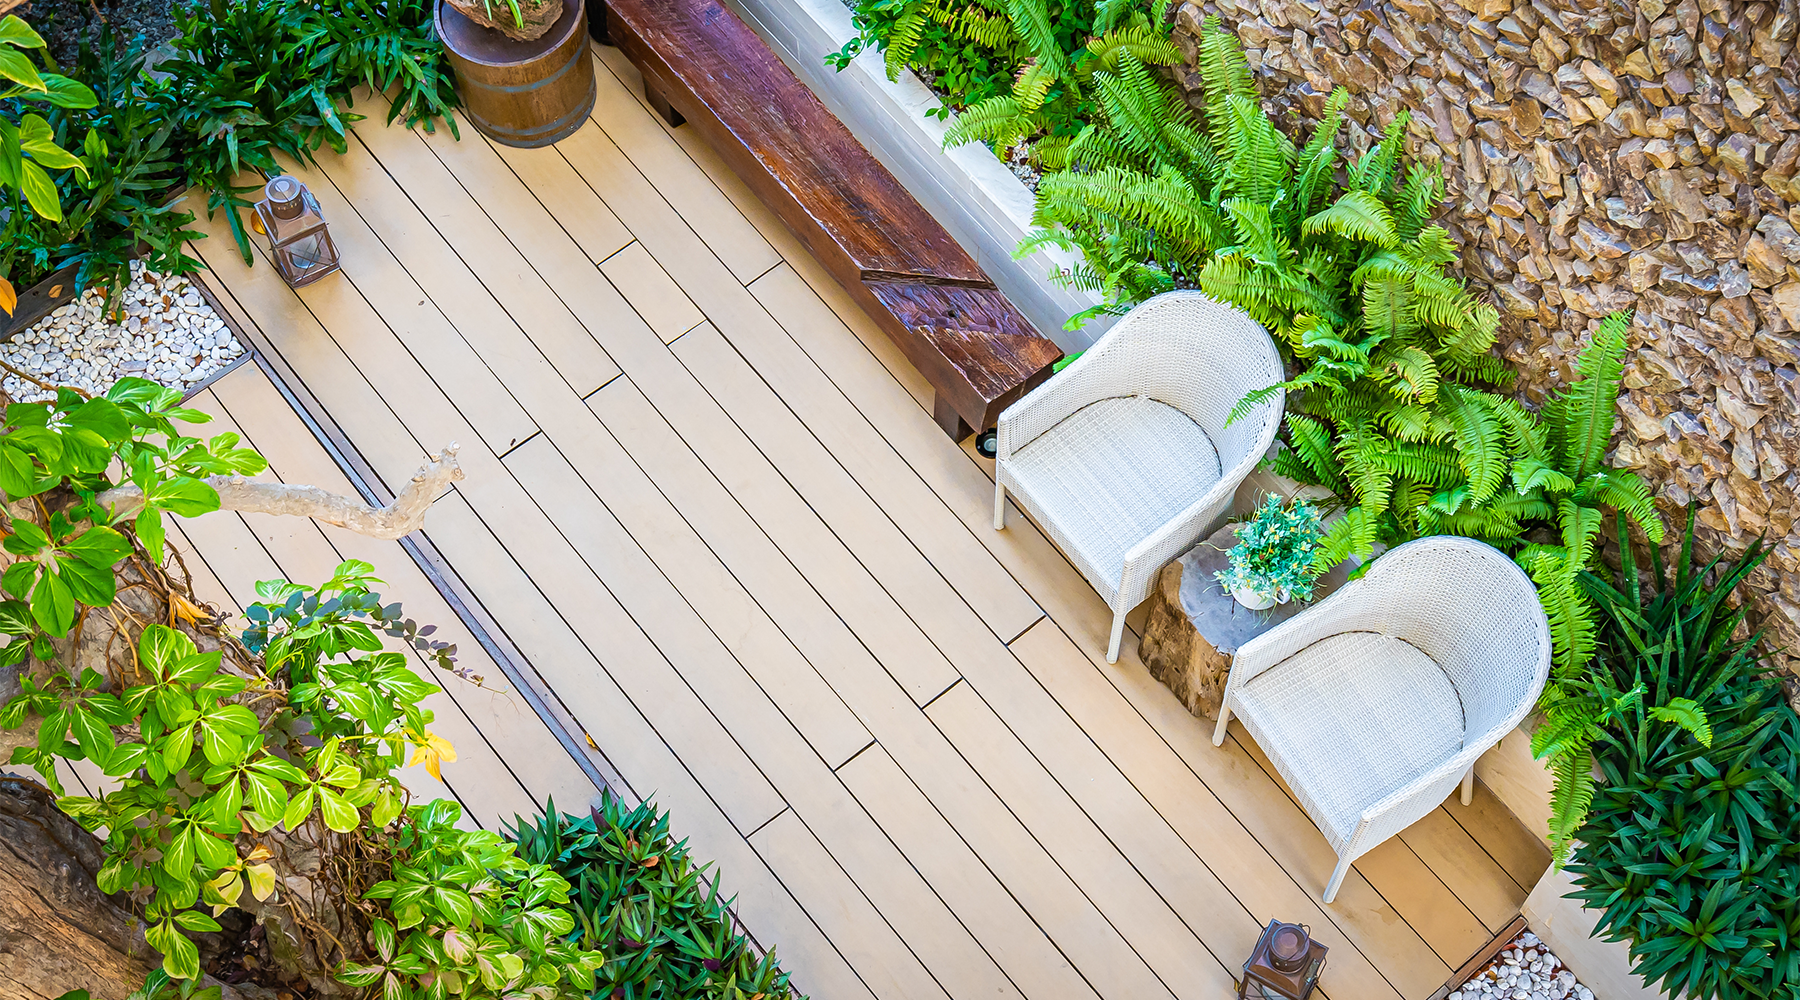 Composite vs Wooden Decking – Why Composite Decking is Perfect for Outdoor Living